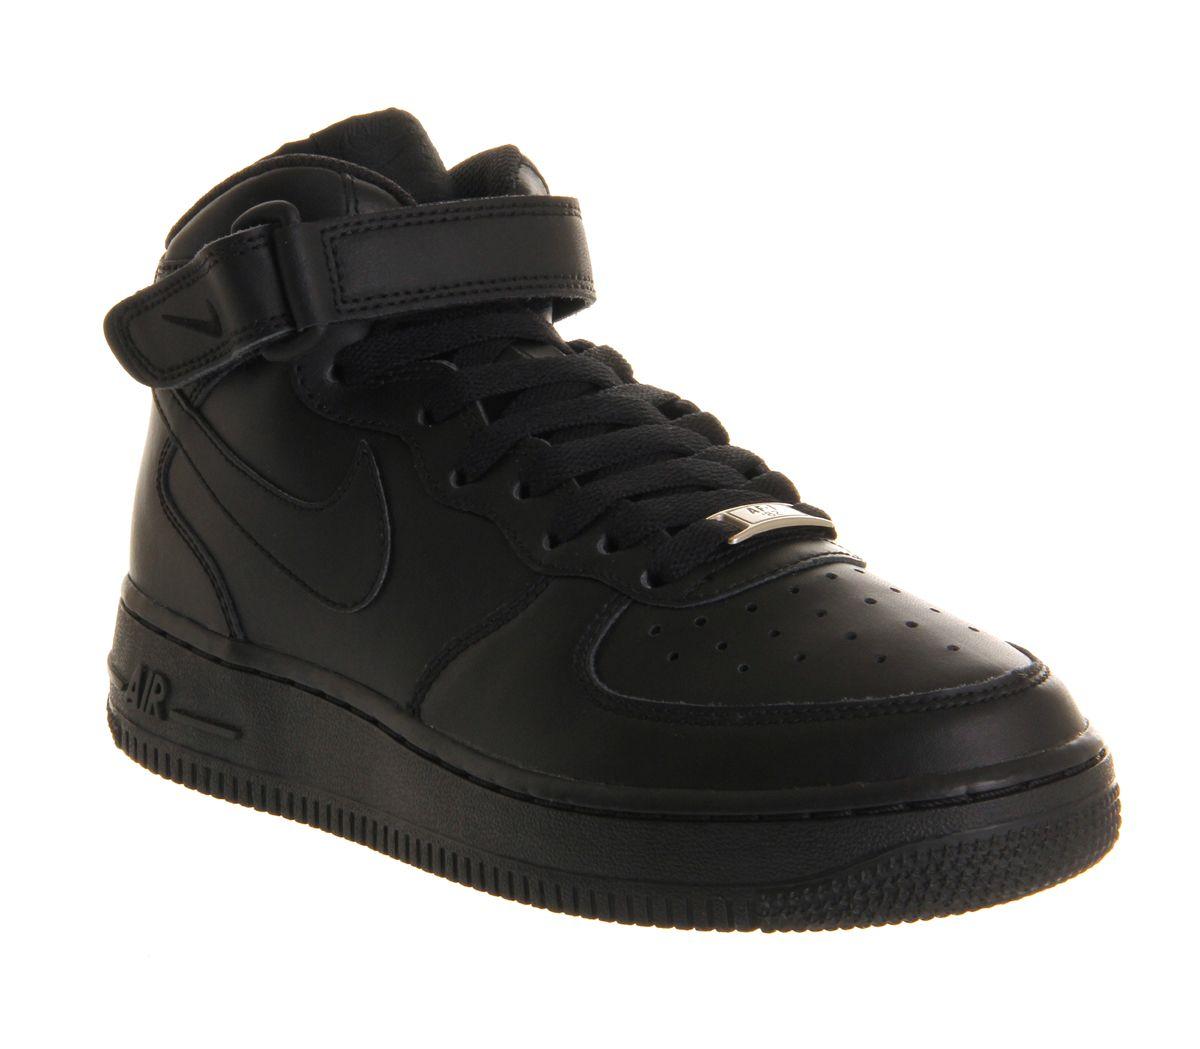 Nike Air Force Mid '07 Leather High-Top Sneakers in Black - Lyst